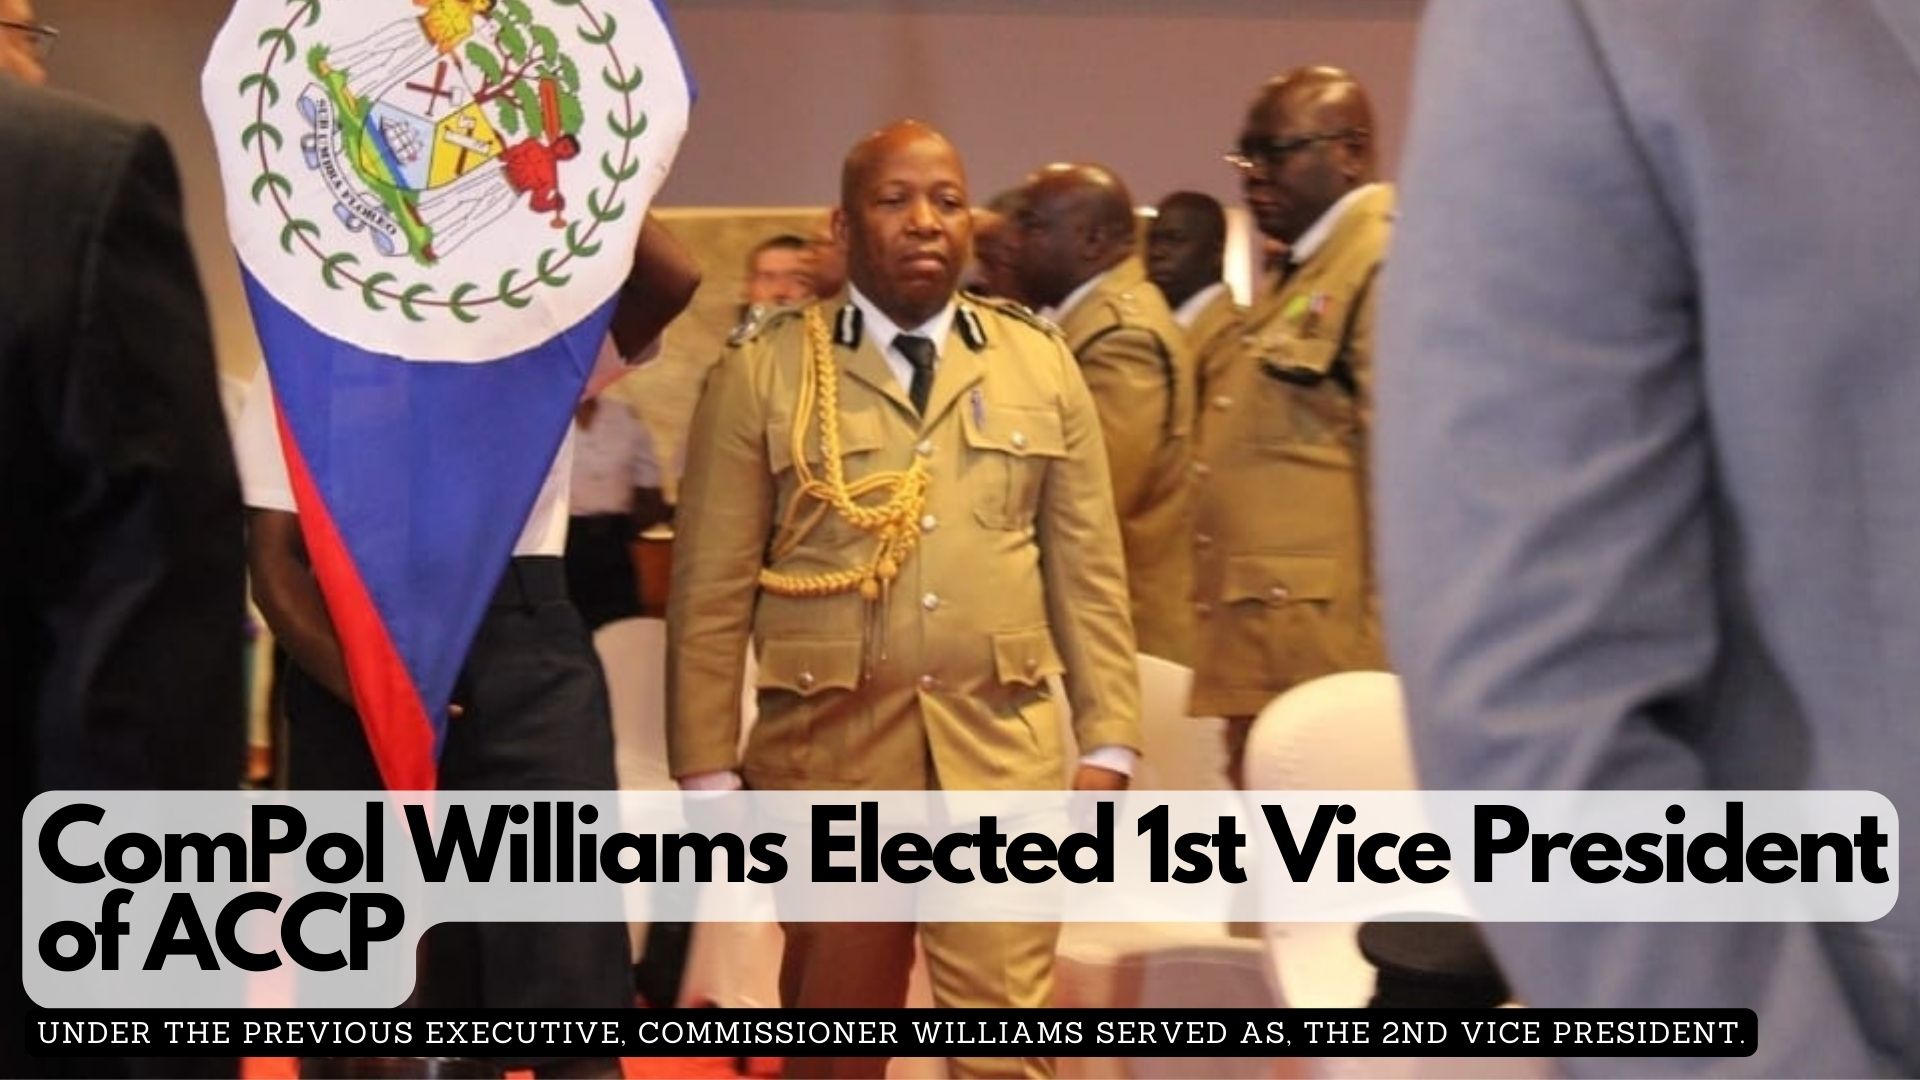 ComPol Williams Elected 1st Vice President of the ACCP